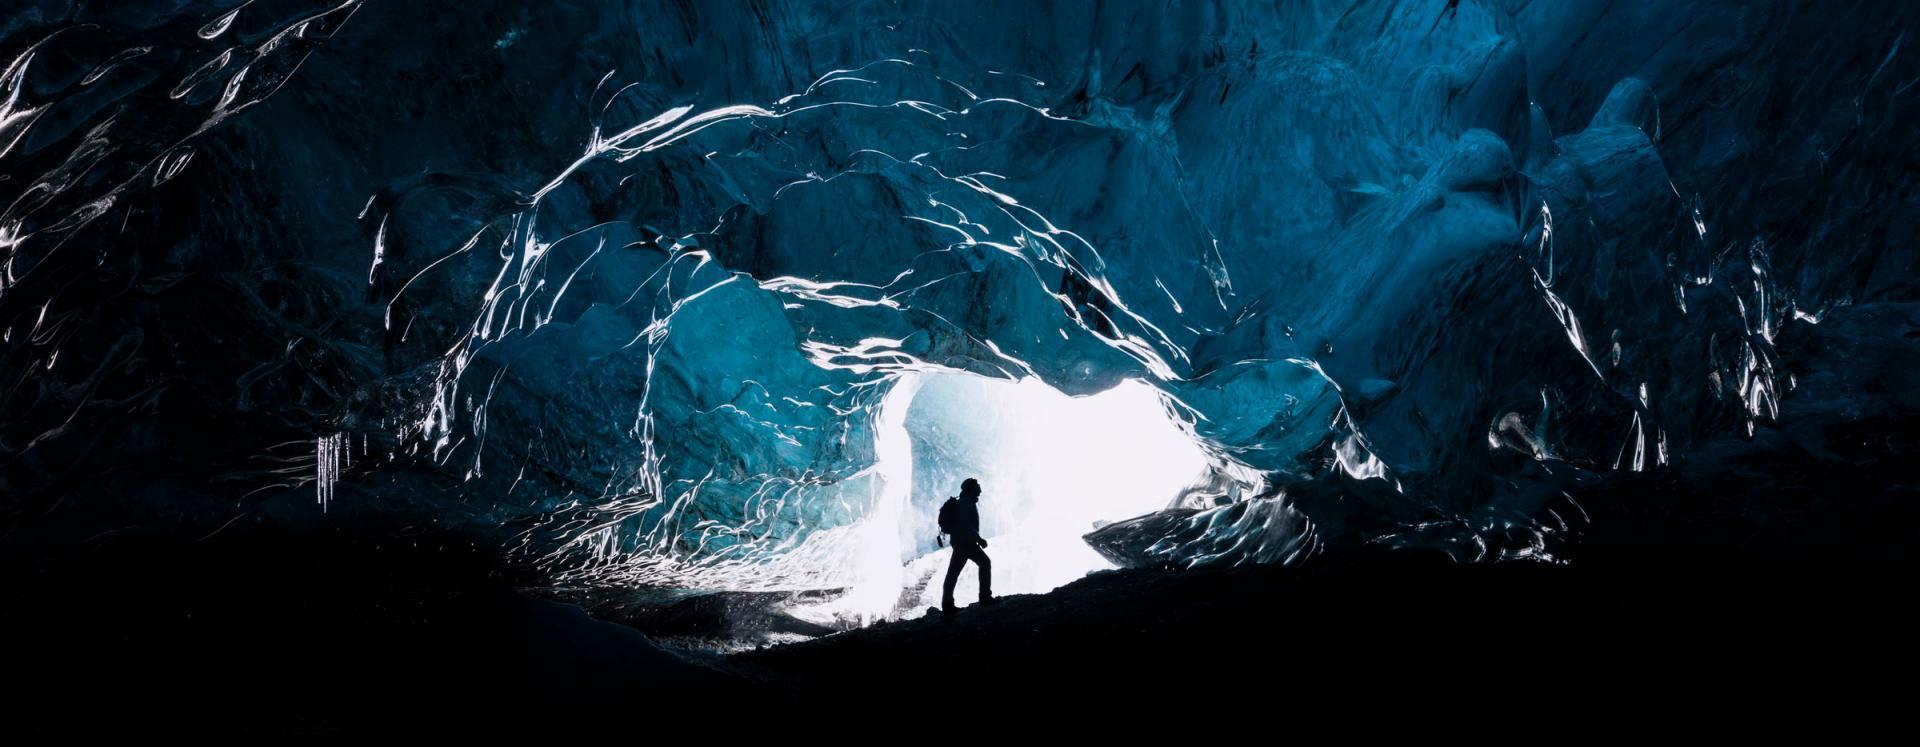 Silhouette Of Man Inside Entrance To Ice Cave